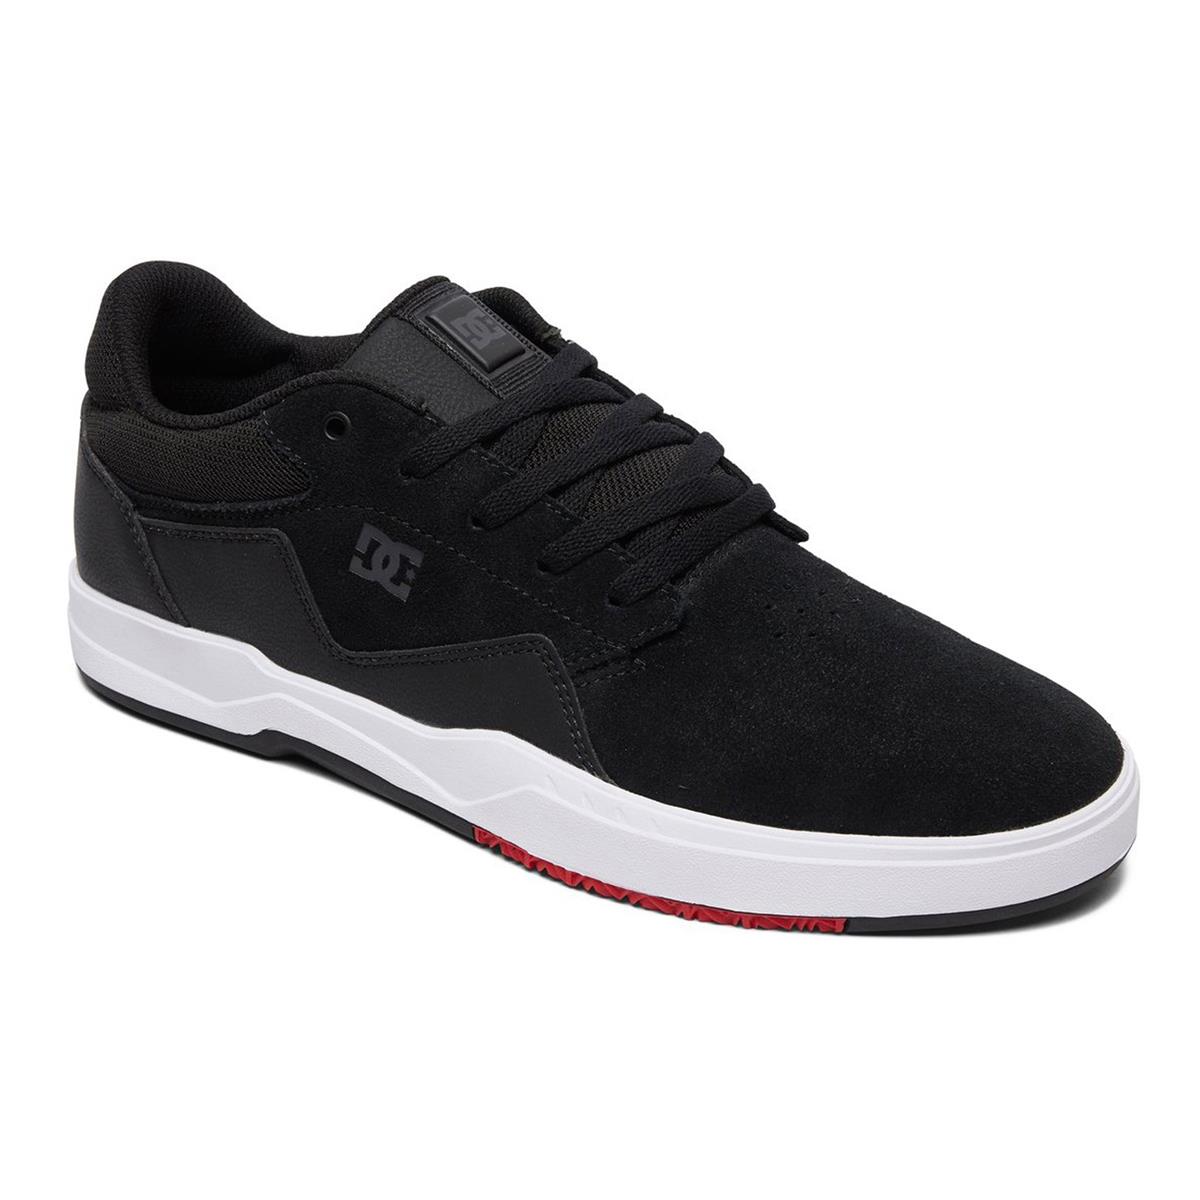 DC Chaussures Barksdale Black/Grey